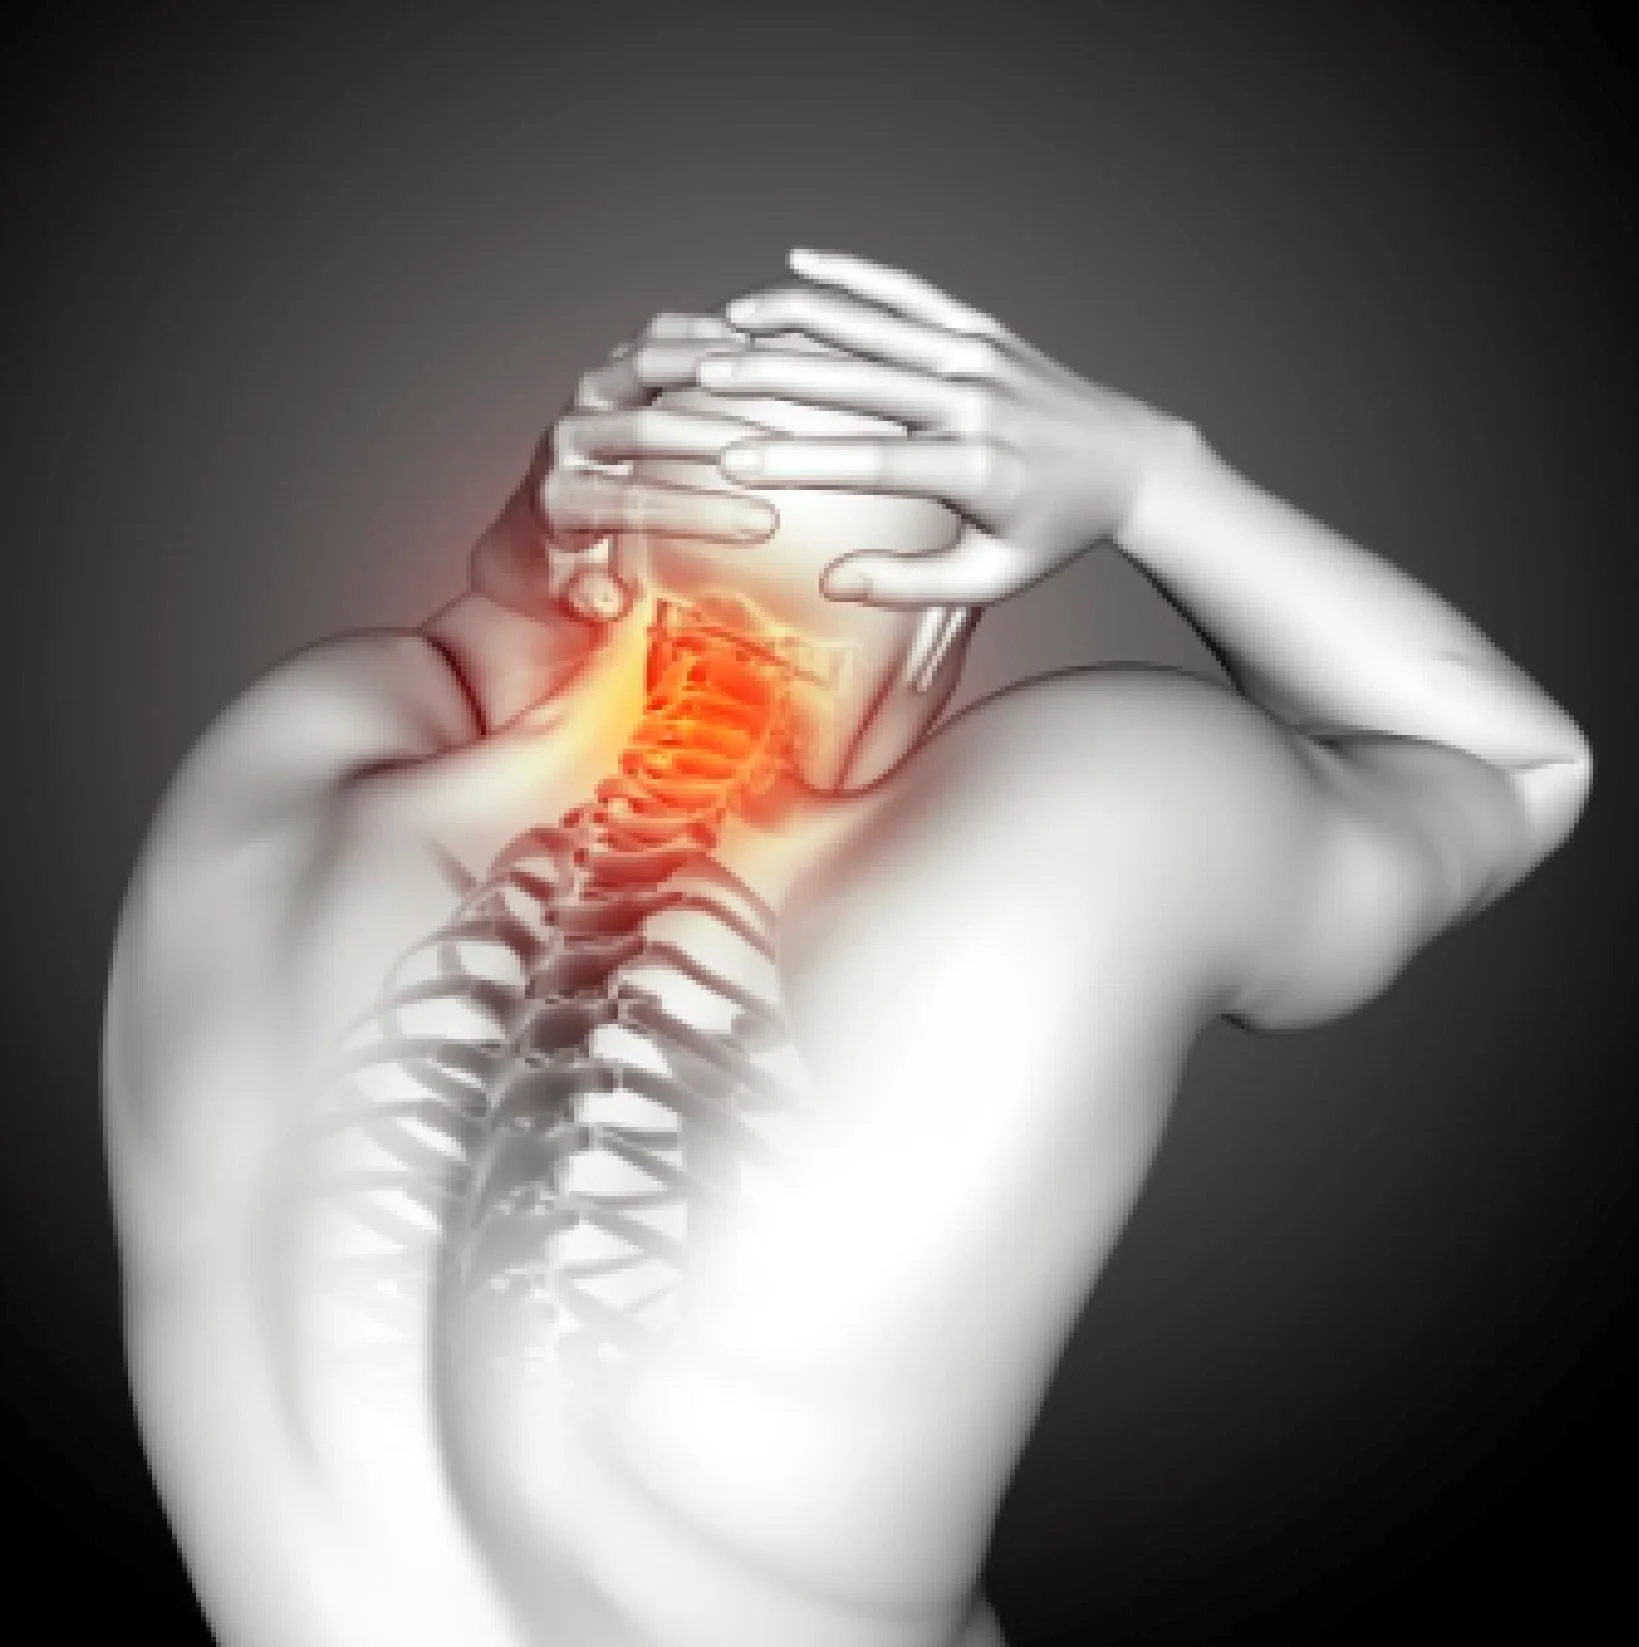 Best Treatment for Spine Malformation at Gangasheel Hospital - Bareilly